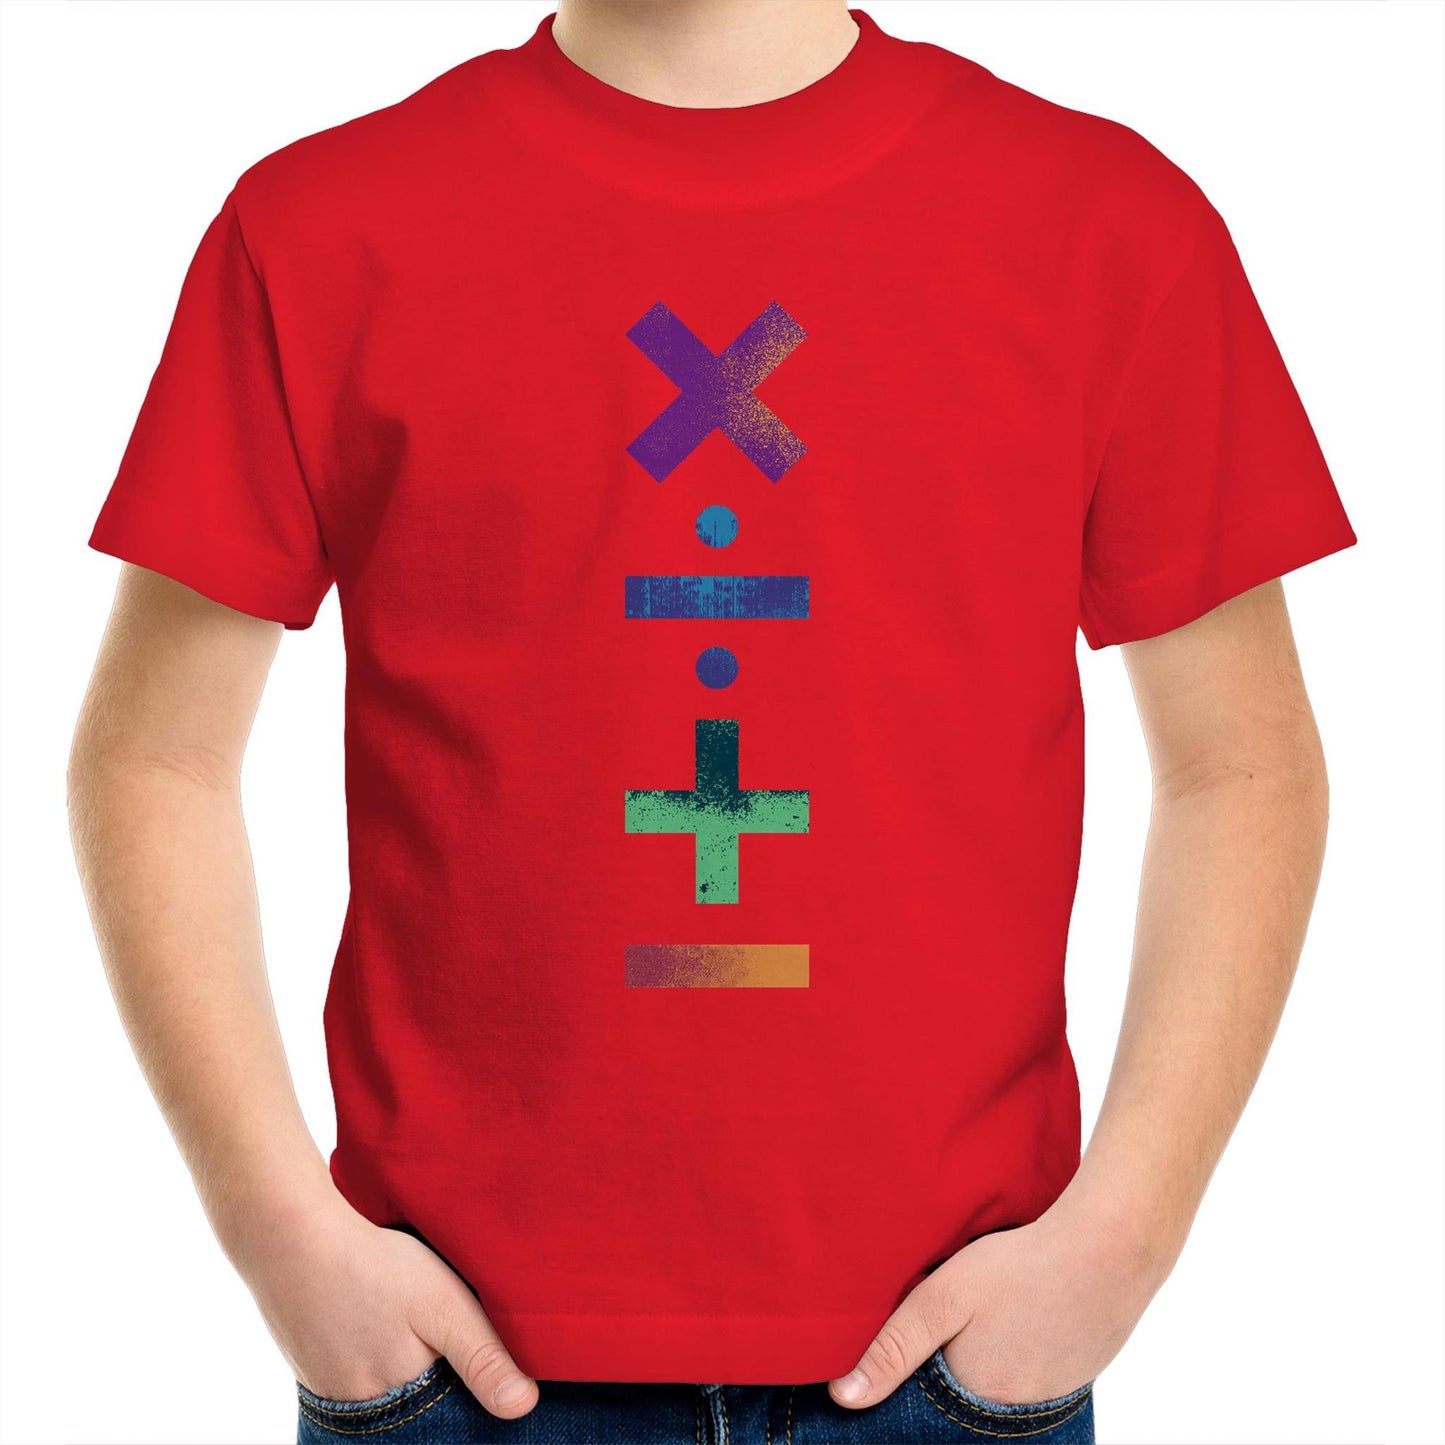 Maths Symbols - Kids Youth Crew T-Shirt Red Kids Youth T-shirt Maths Science